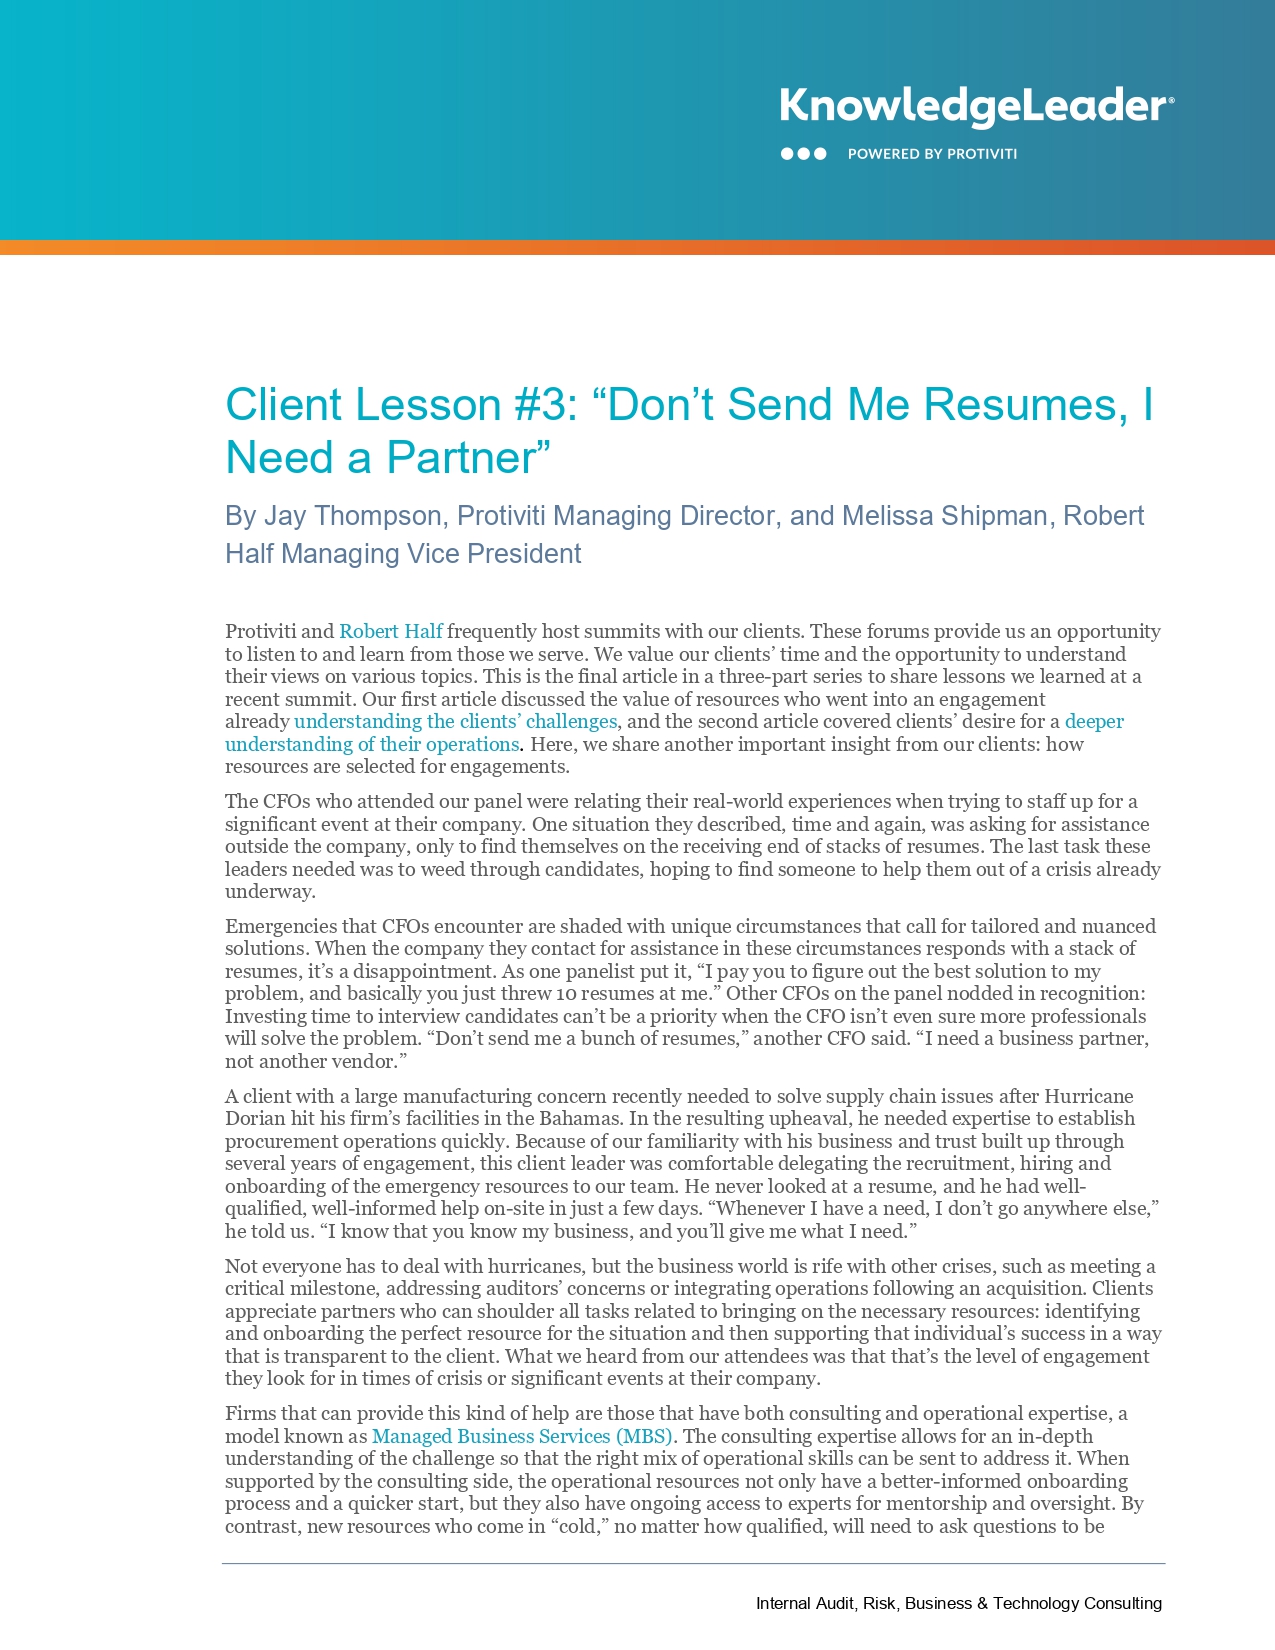 Client Lesson #3: “Don’t Send Me Resumes, I Need a Partner”